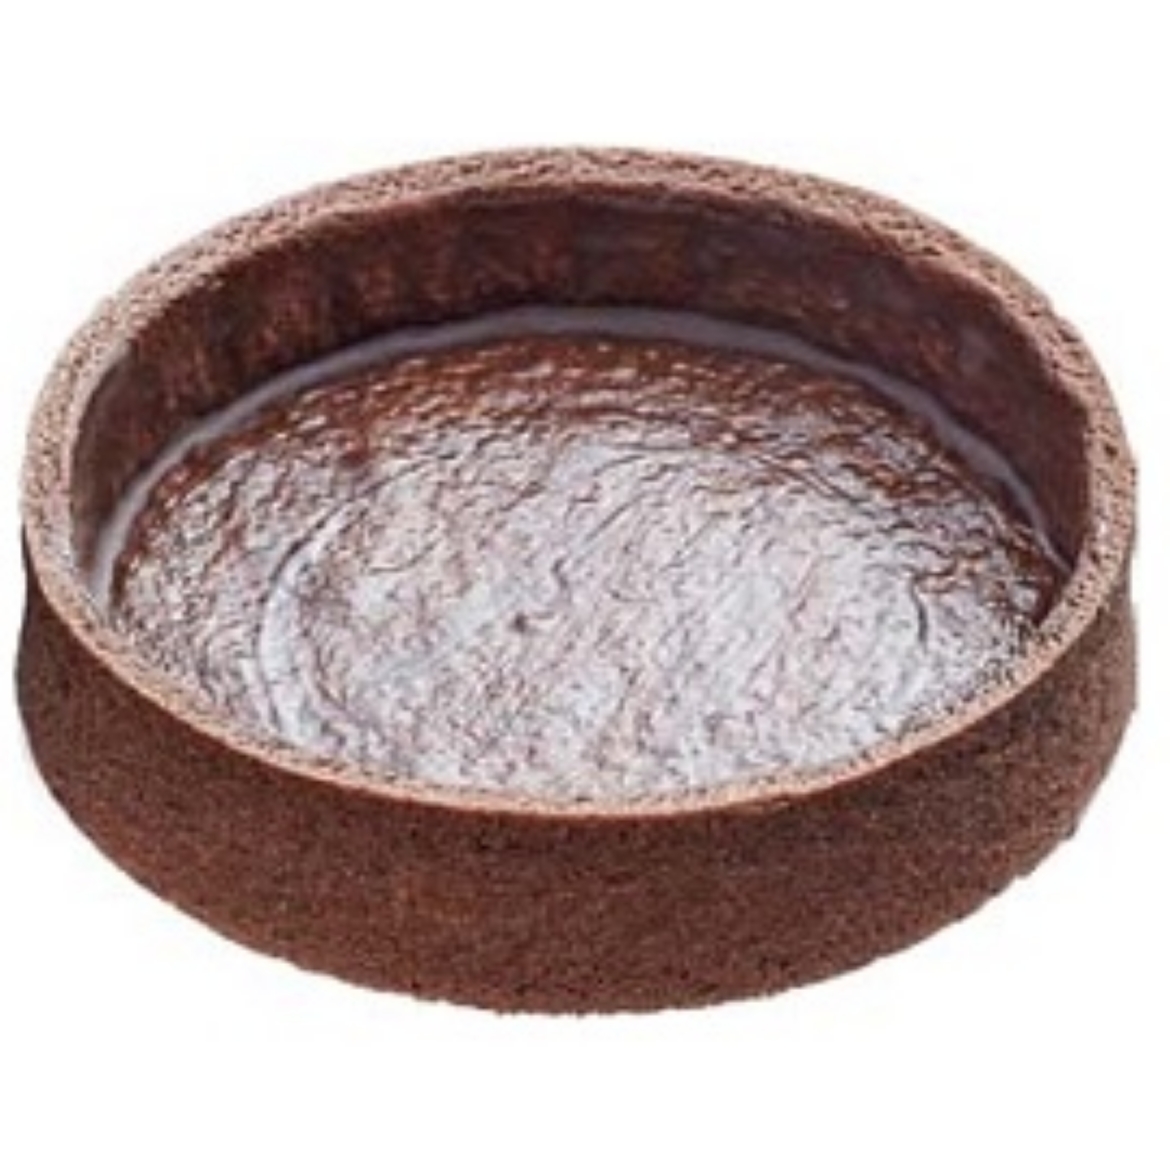 Picture of 45s LRN CHOCOLATE TART SHELLS LARGE 81mm (C4RD)